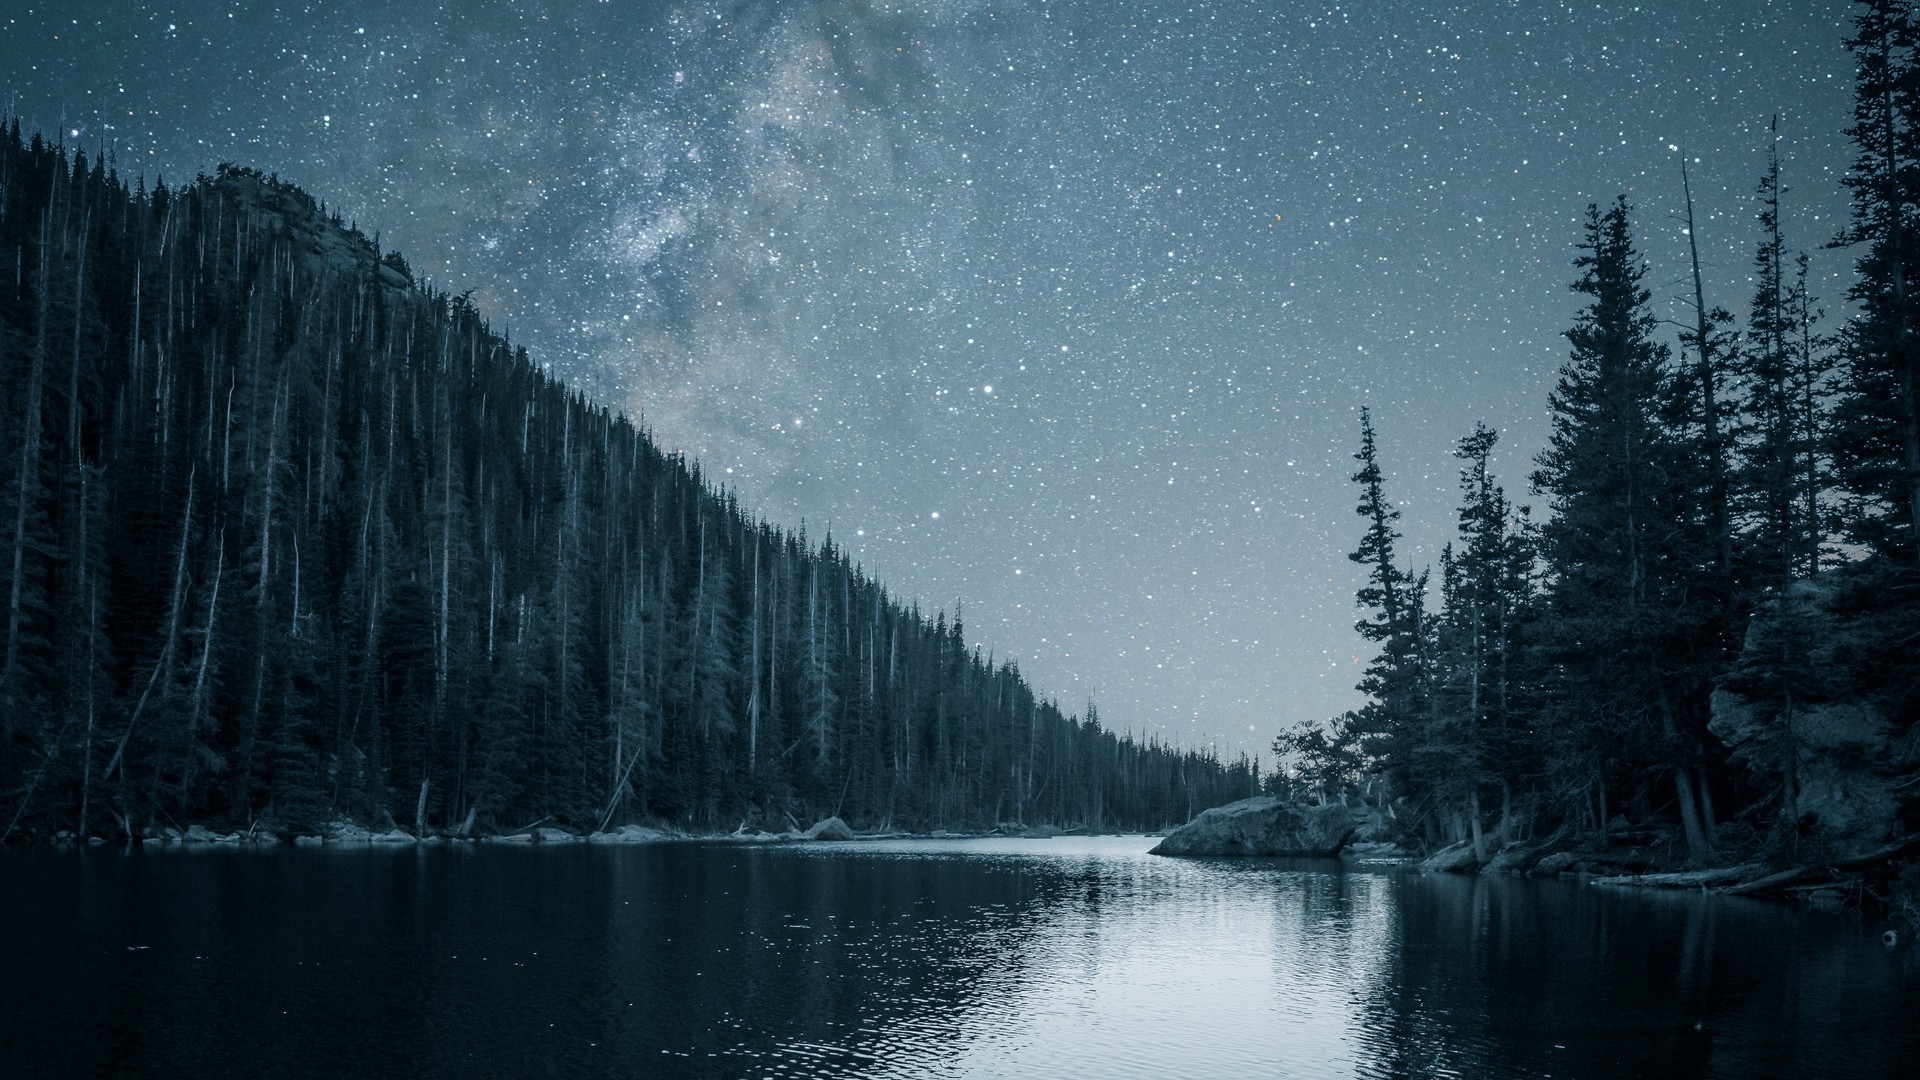 1920x1080 wallpapers: river, trees, starry sky, night (image)